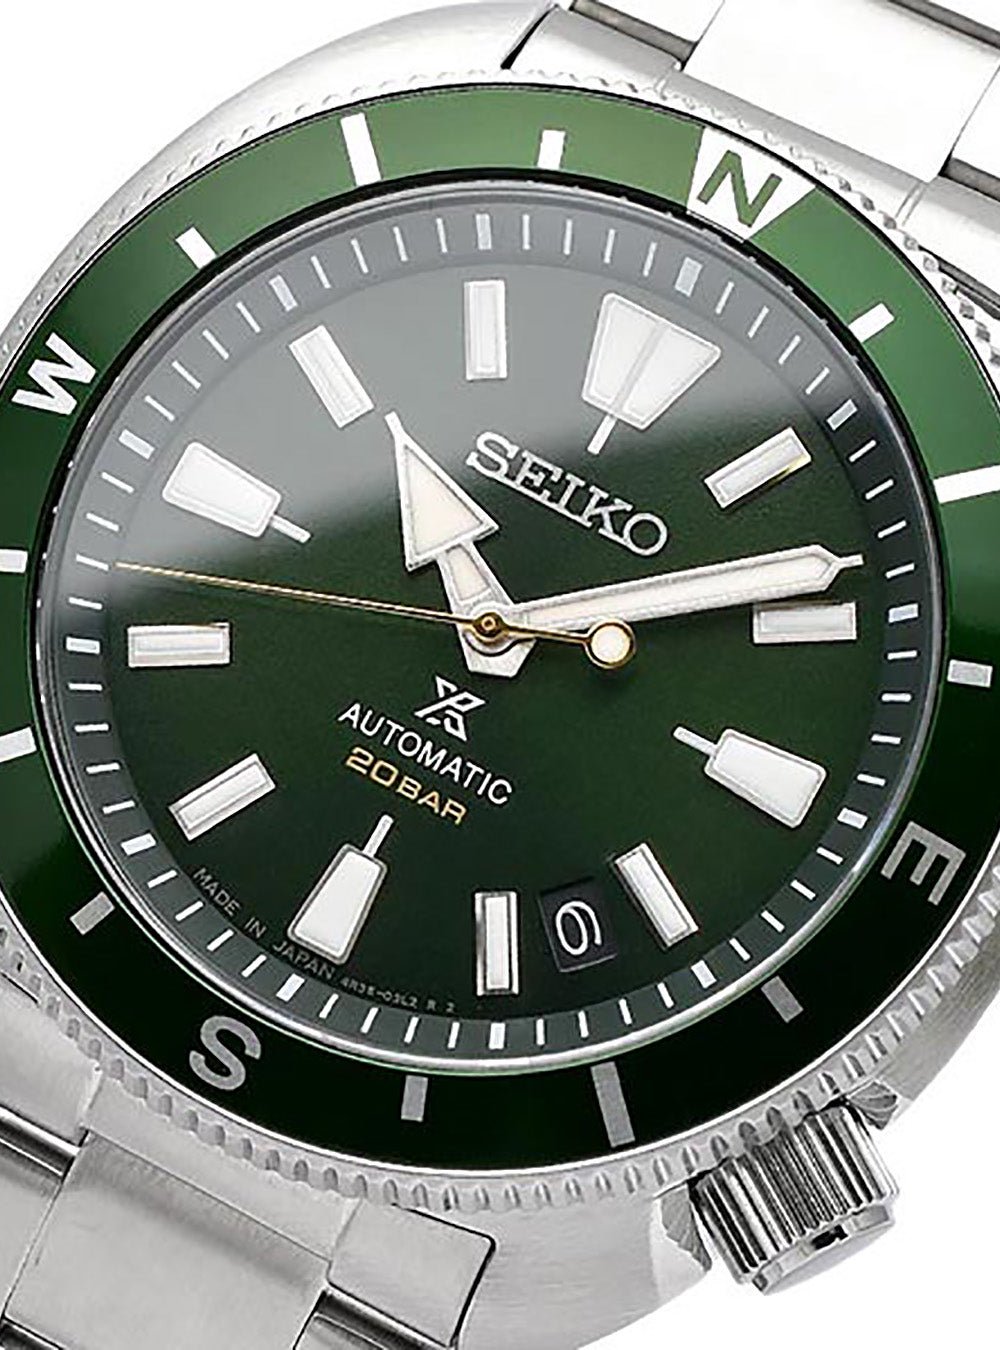 SEIKO PROSPEX FIELD MASTER SBDY111 MADE IN JAPAN JDMWRISTWATCHjapan-select